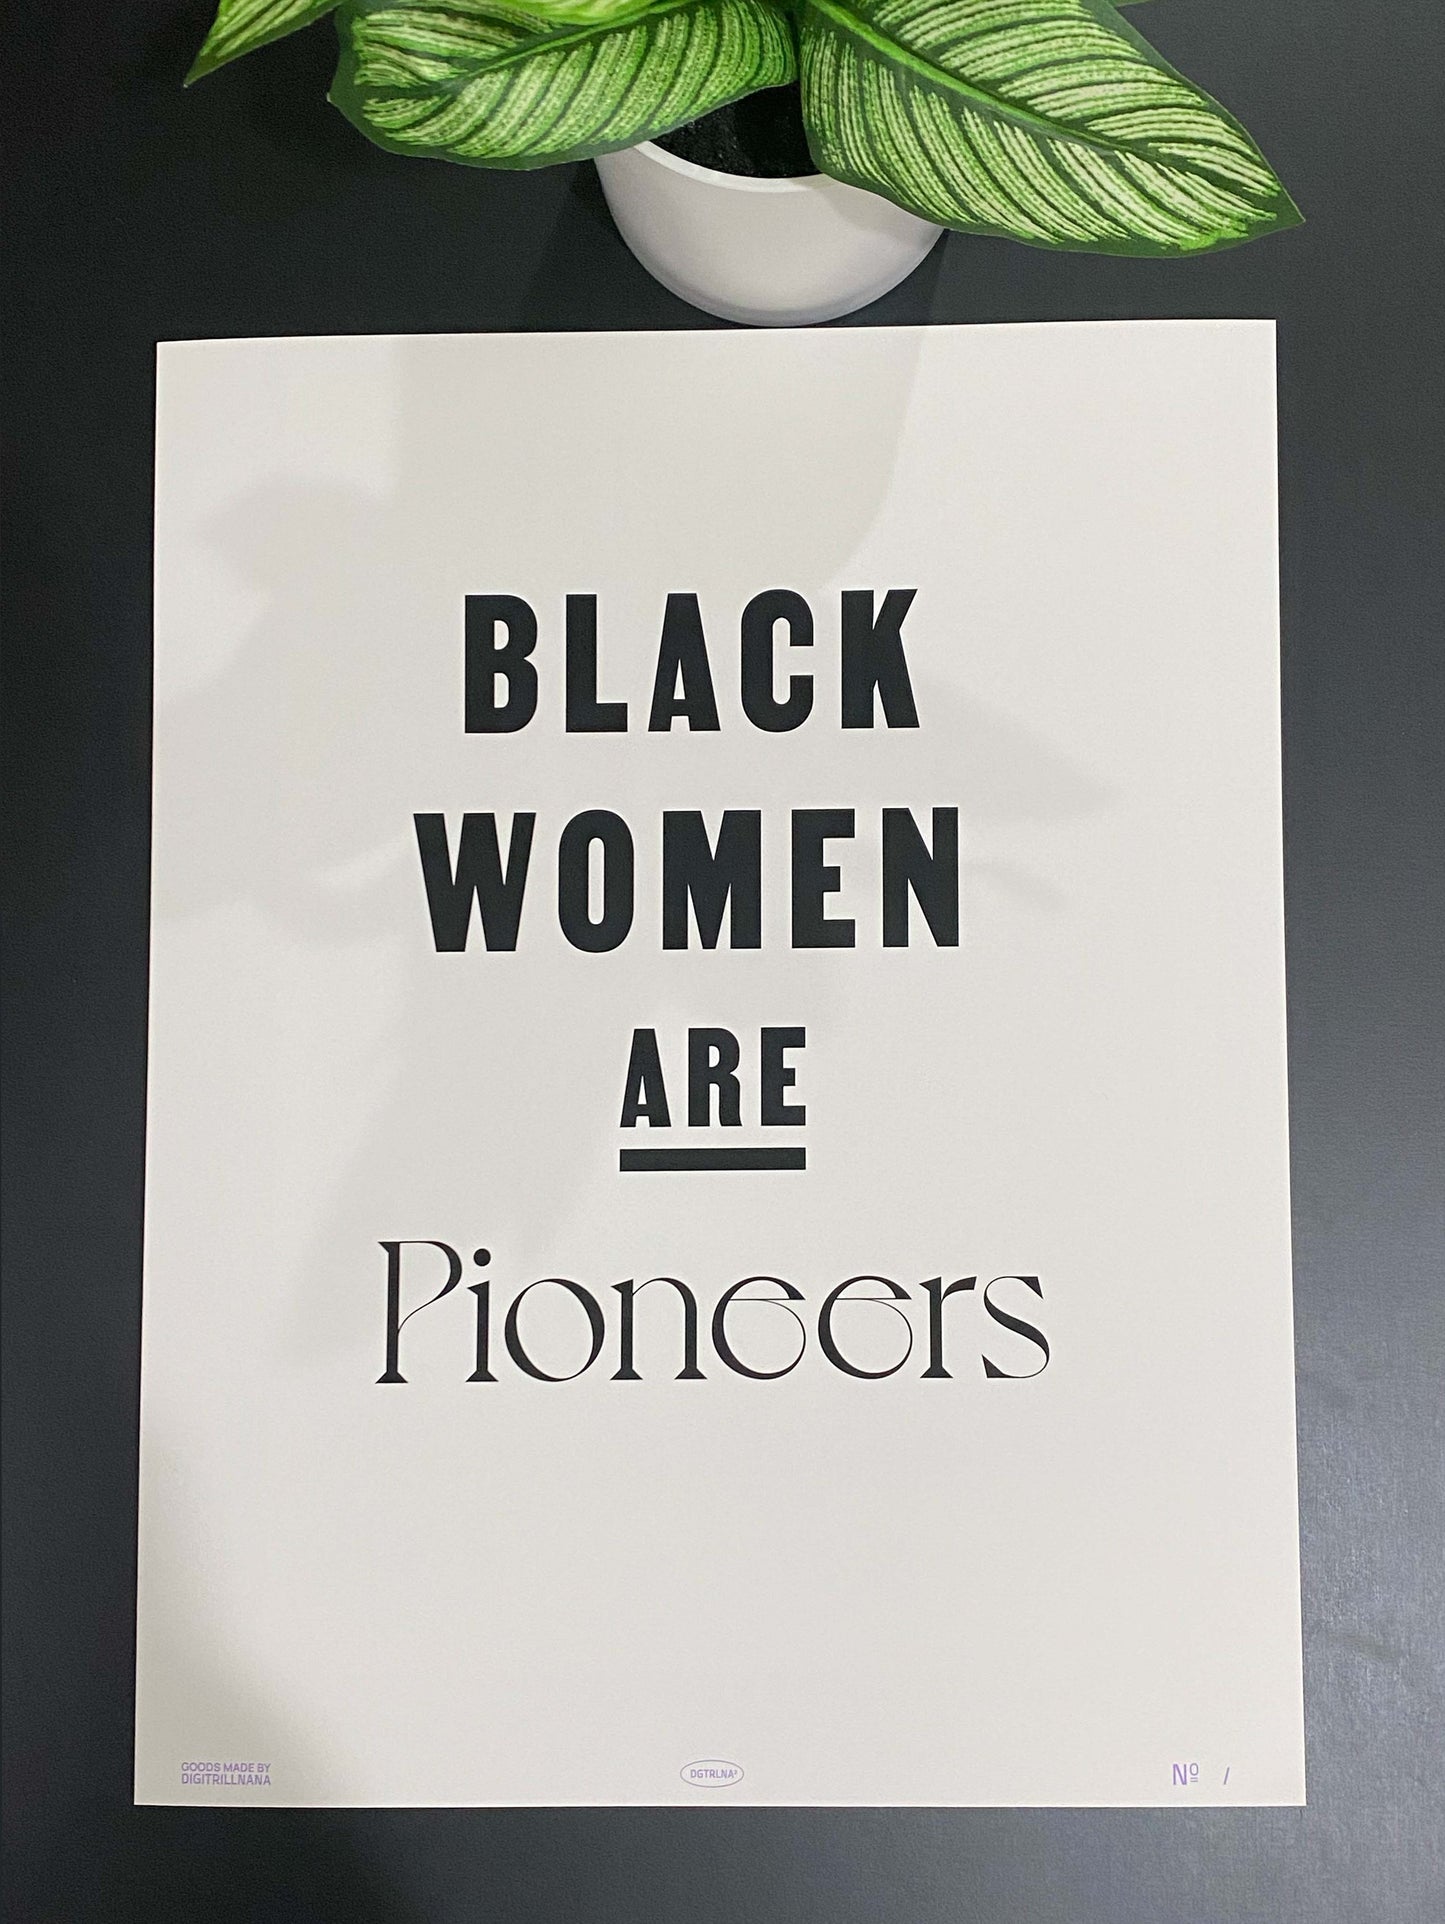 Pioneers 11x14” typography inspirational quote art print from Goods Made By Digitrillnana, Ashley Fletcher. Black Woman art. Perfect for home decor, wall art, art prints, and more! Black Woman Owned.